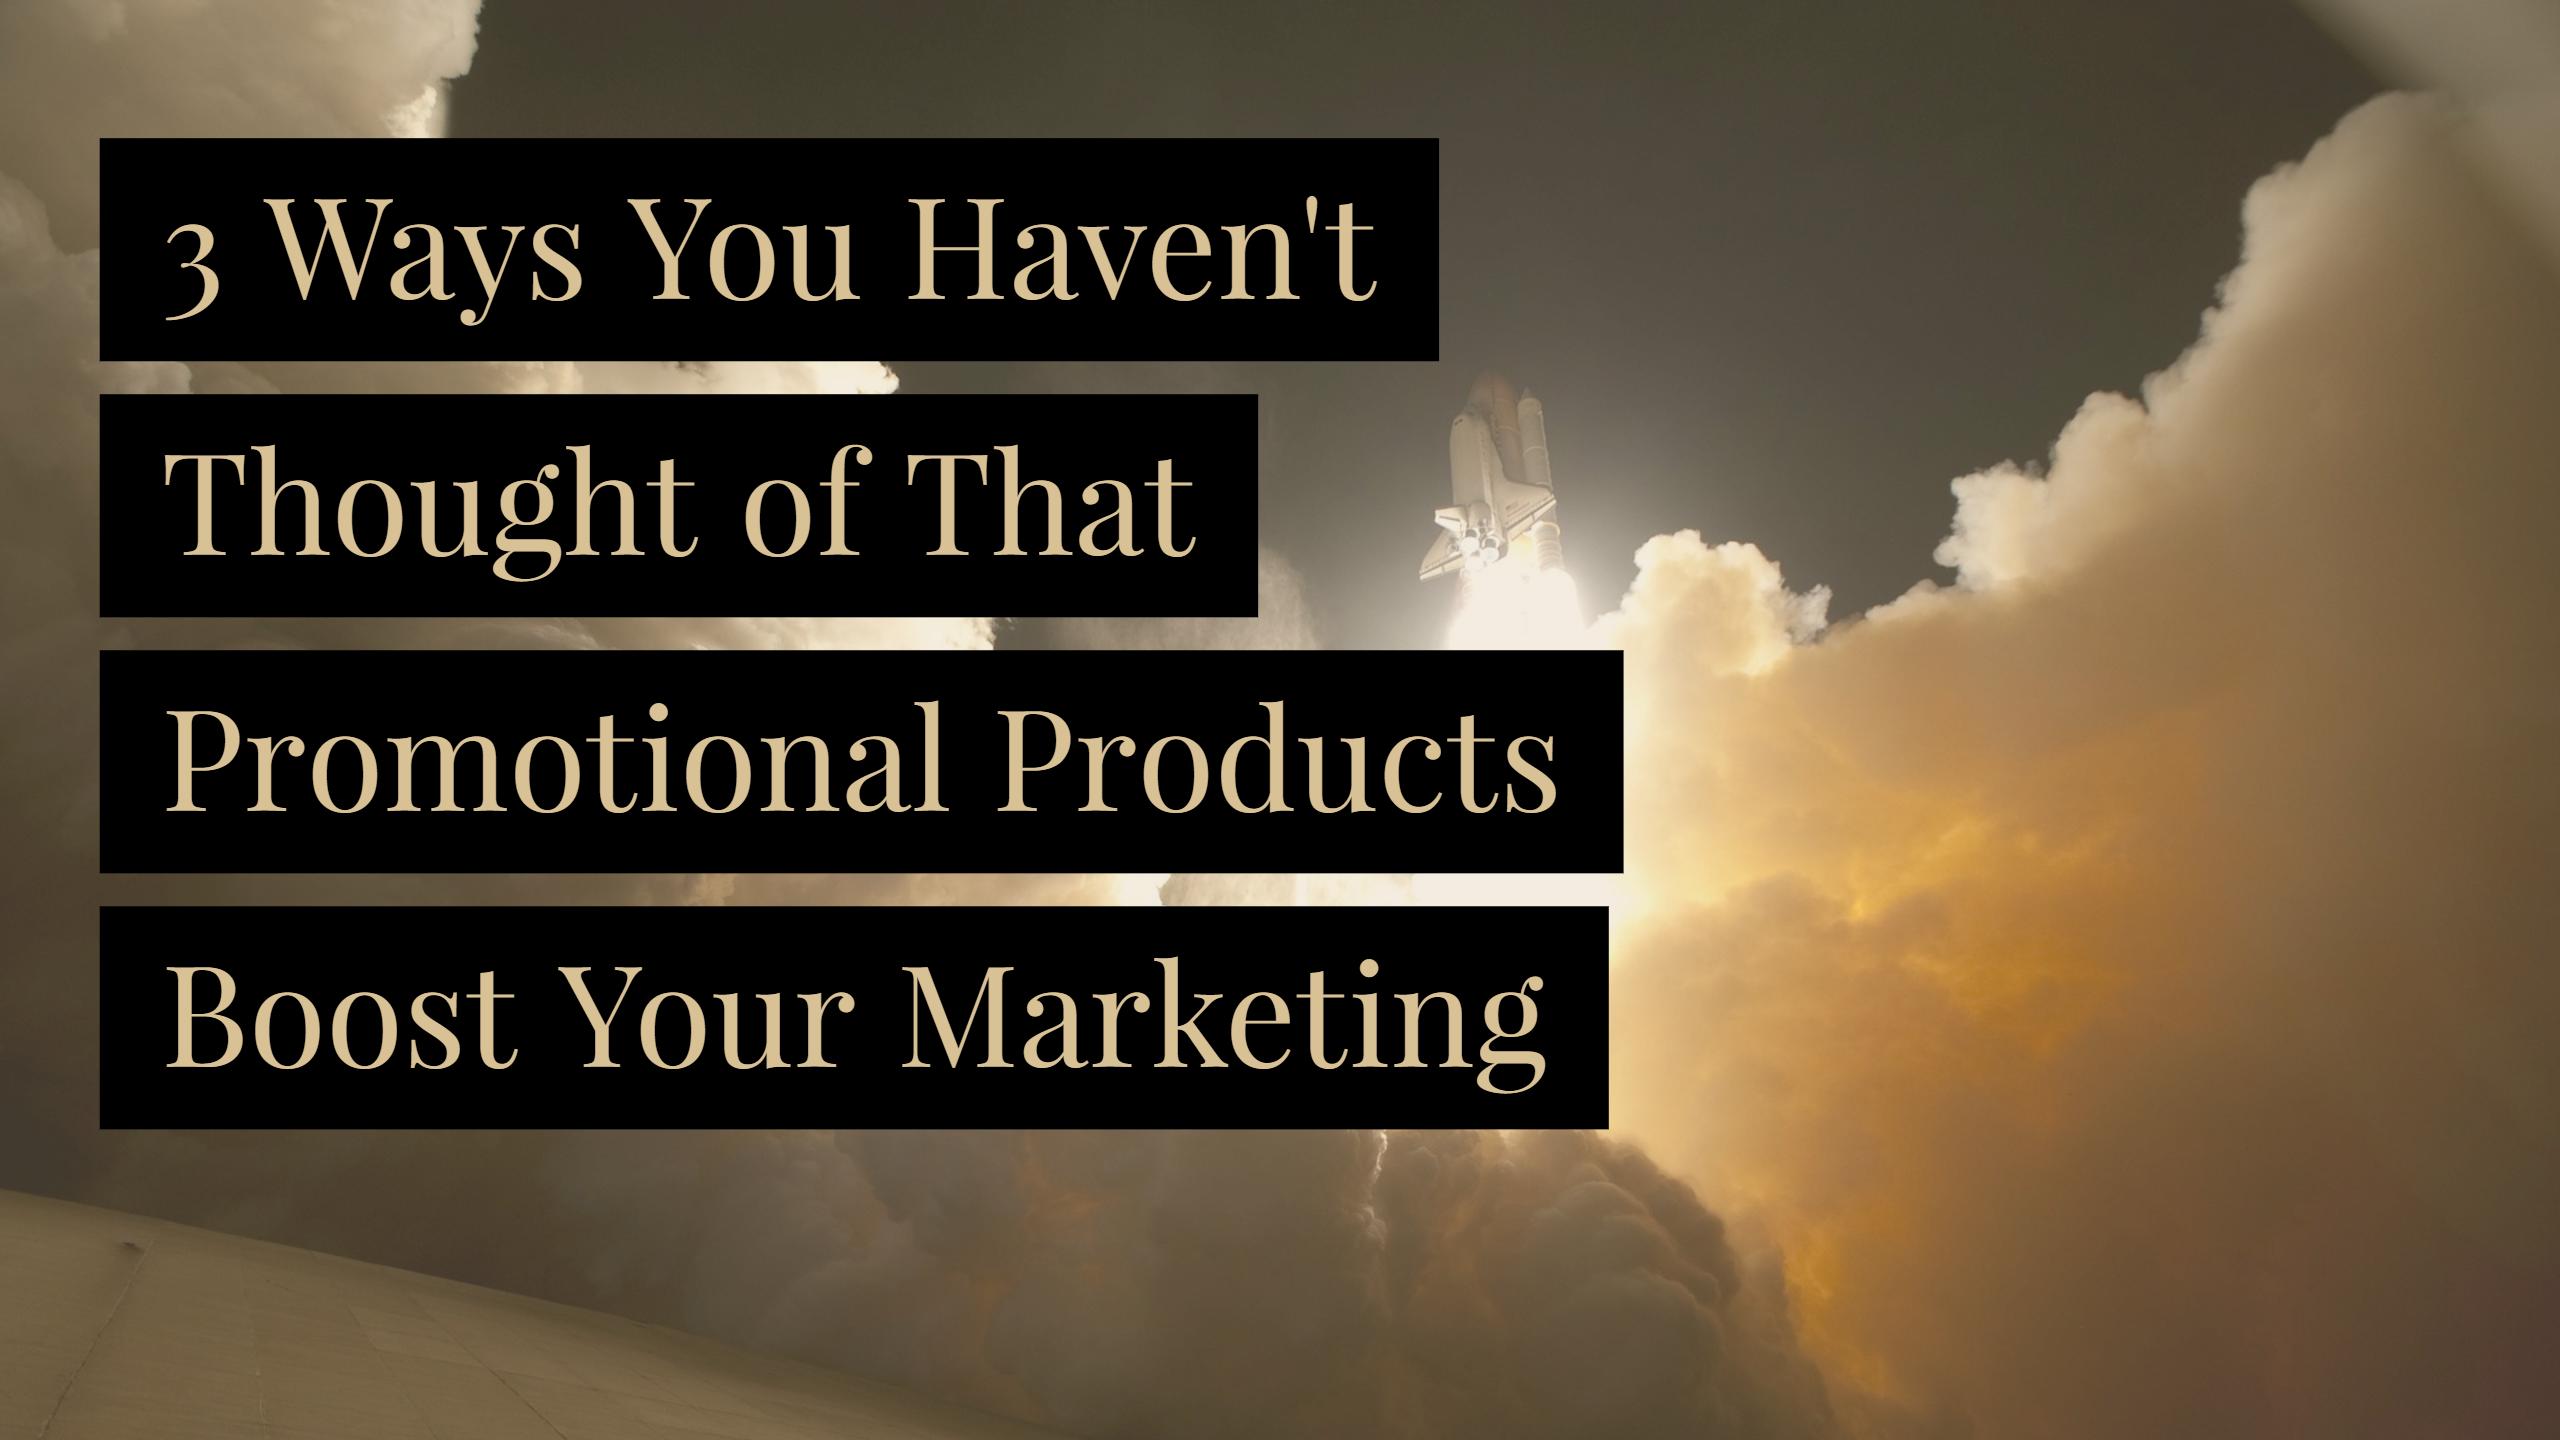 3 Ways You Haven’t Thought of That Promotional Products Boost Your Marketing